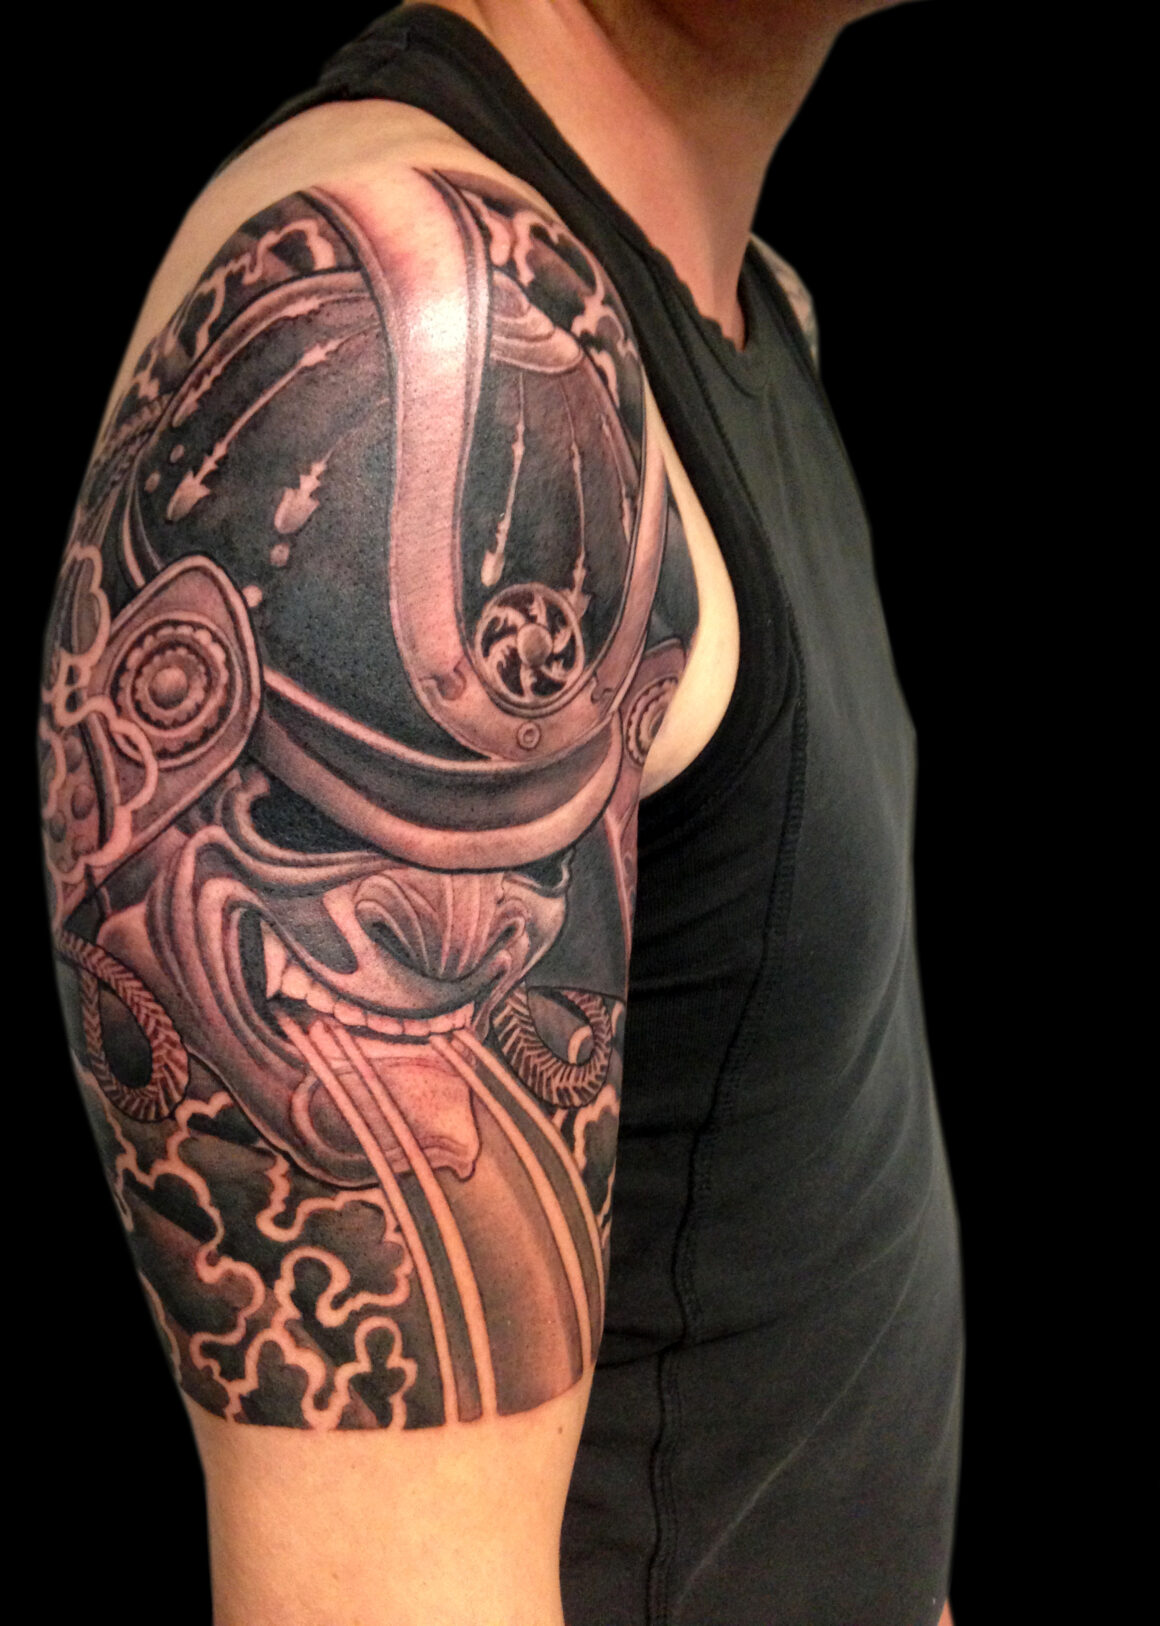 Tattoo by Stef Krief, @stef_illusion_of_light